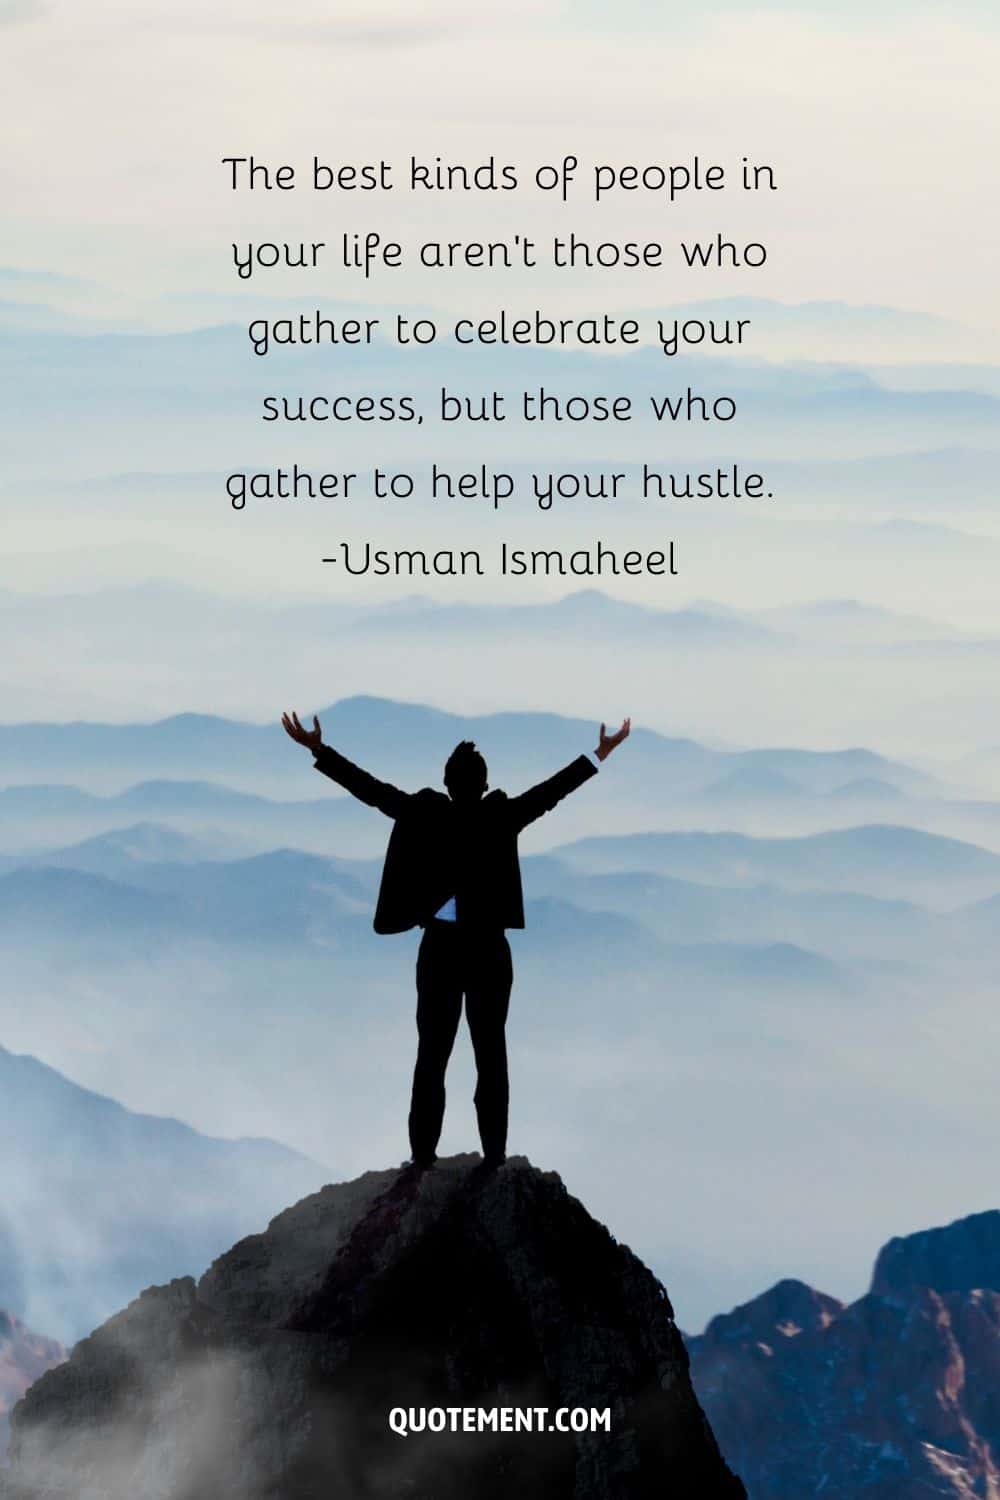 image of a man with raised hands on mountain top representing brilliant hustle quote